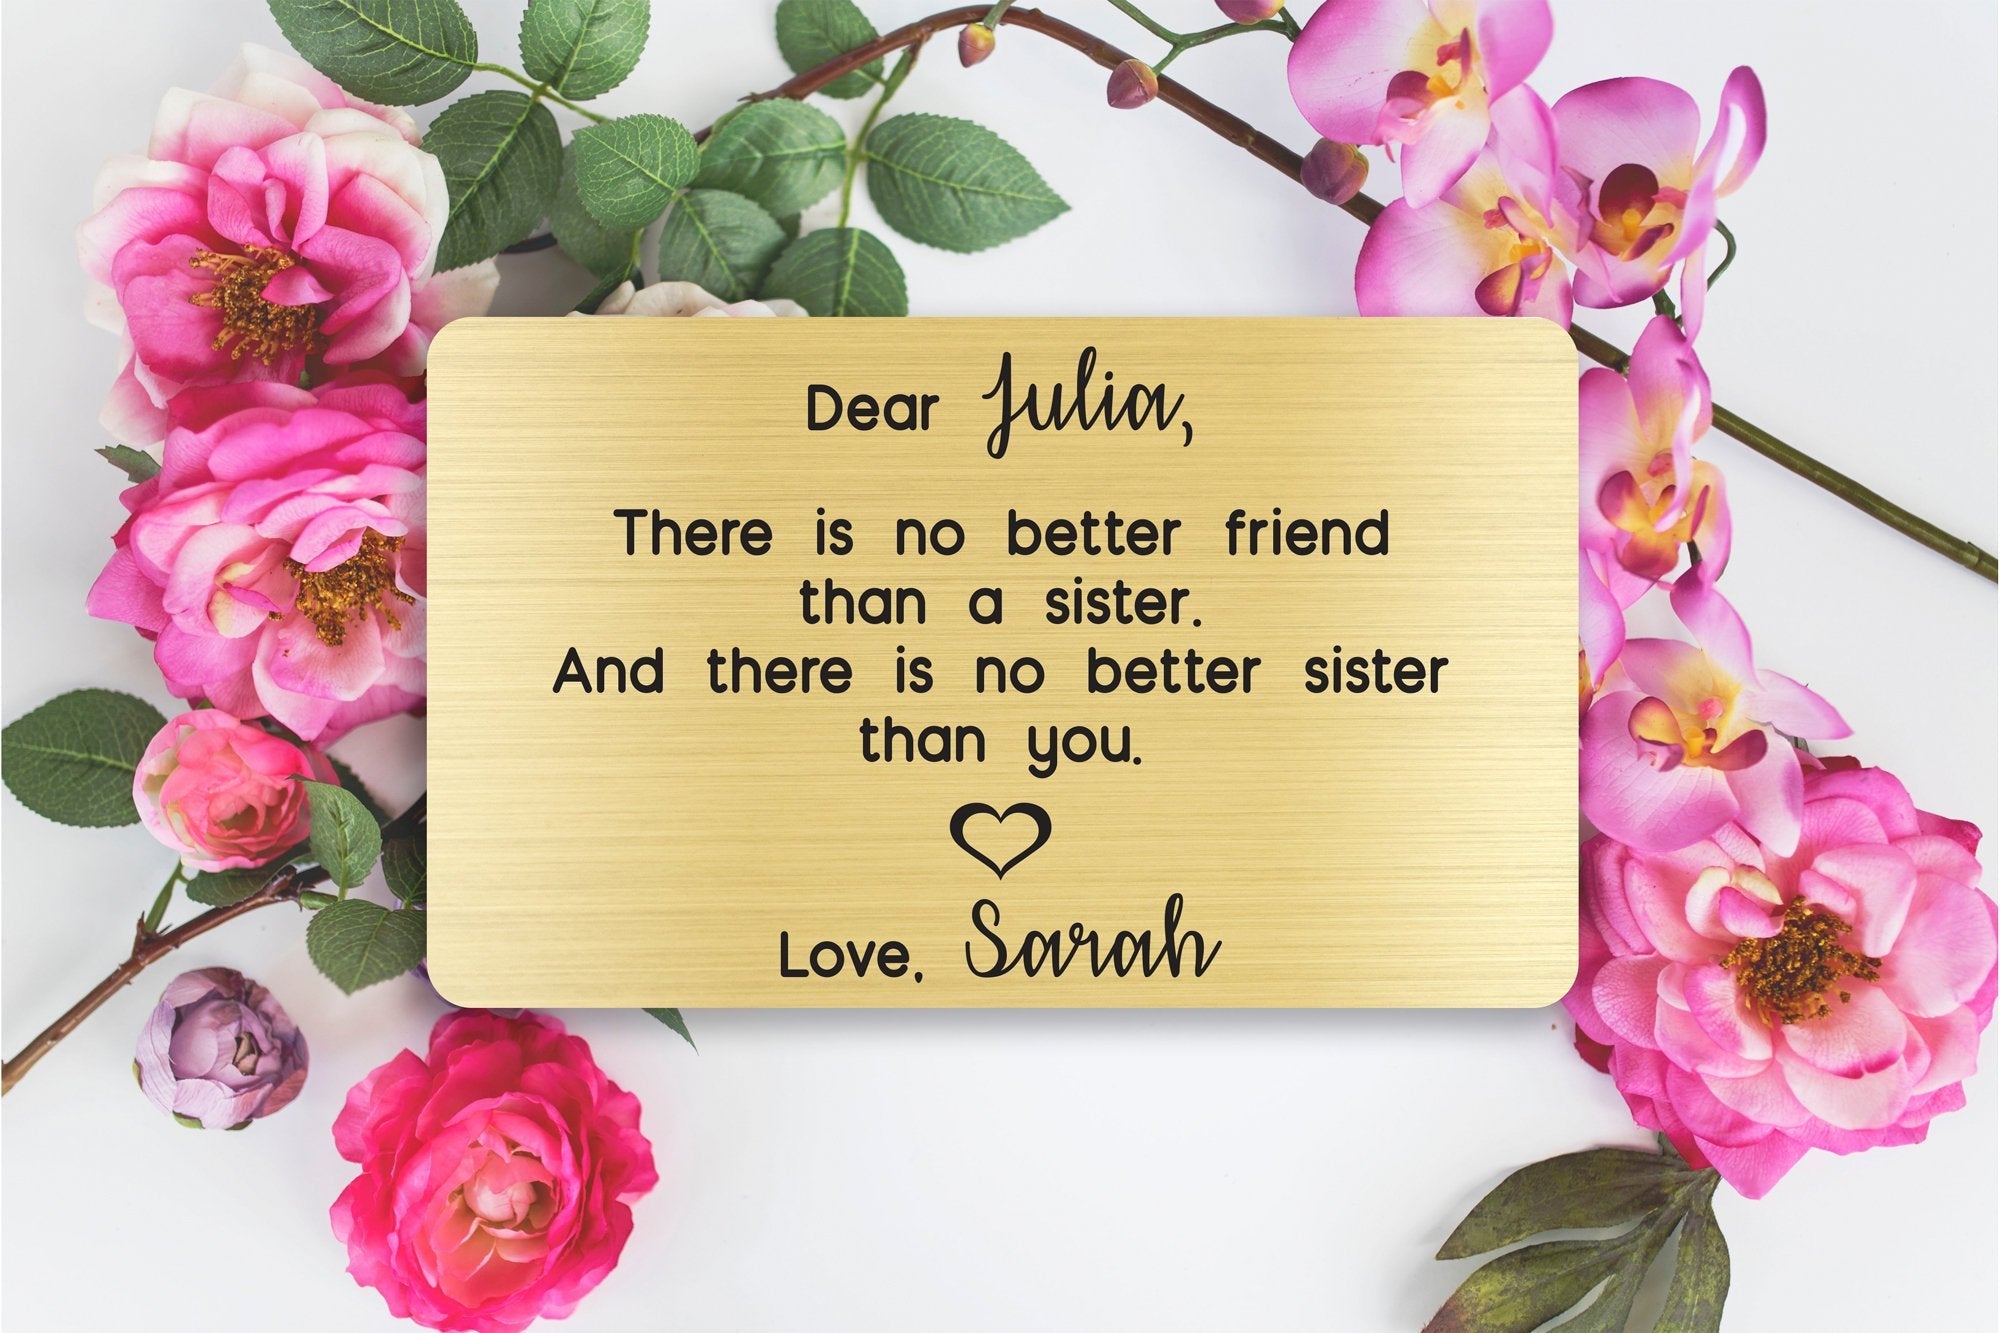 Personalized Engraved Wallet Card Insert, Sibling, Sister, Family Gift, -No Better Friend- Gold